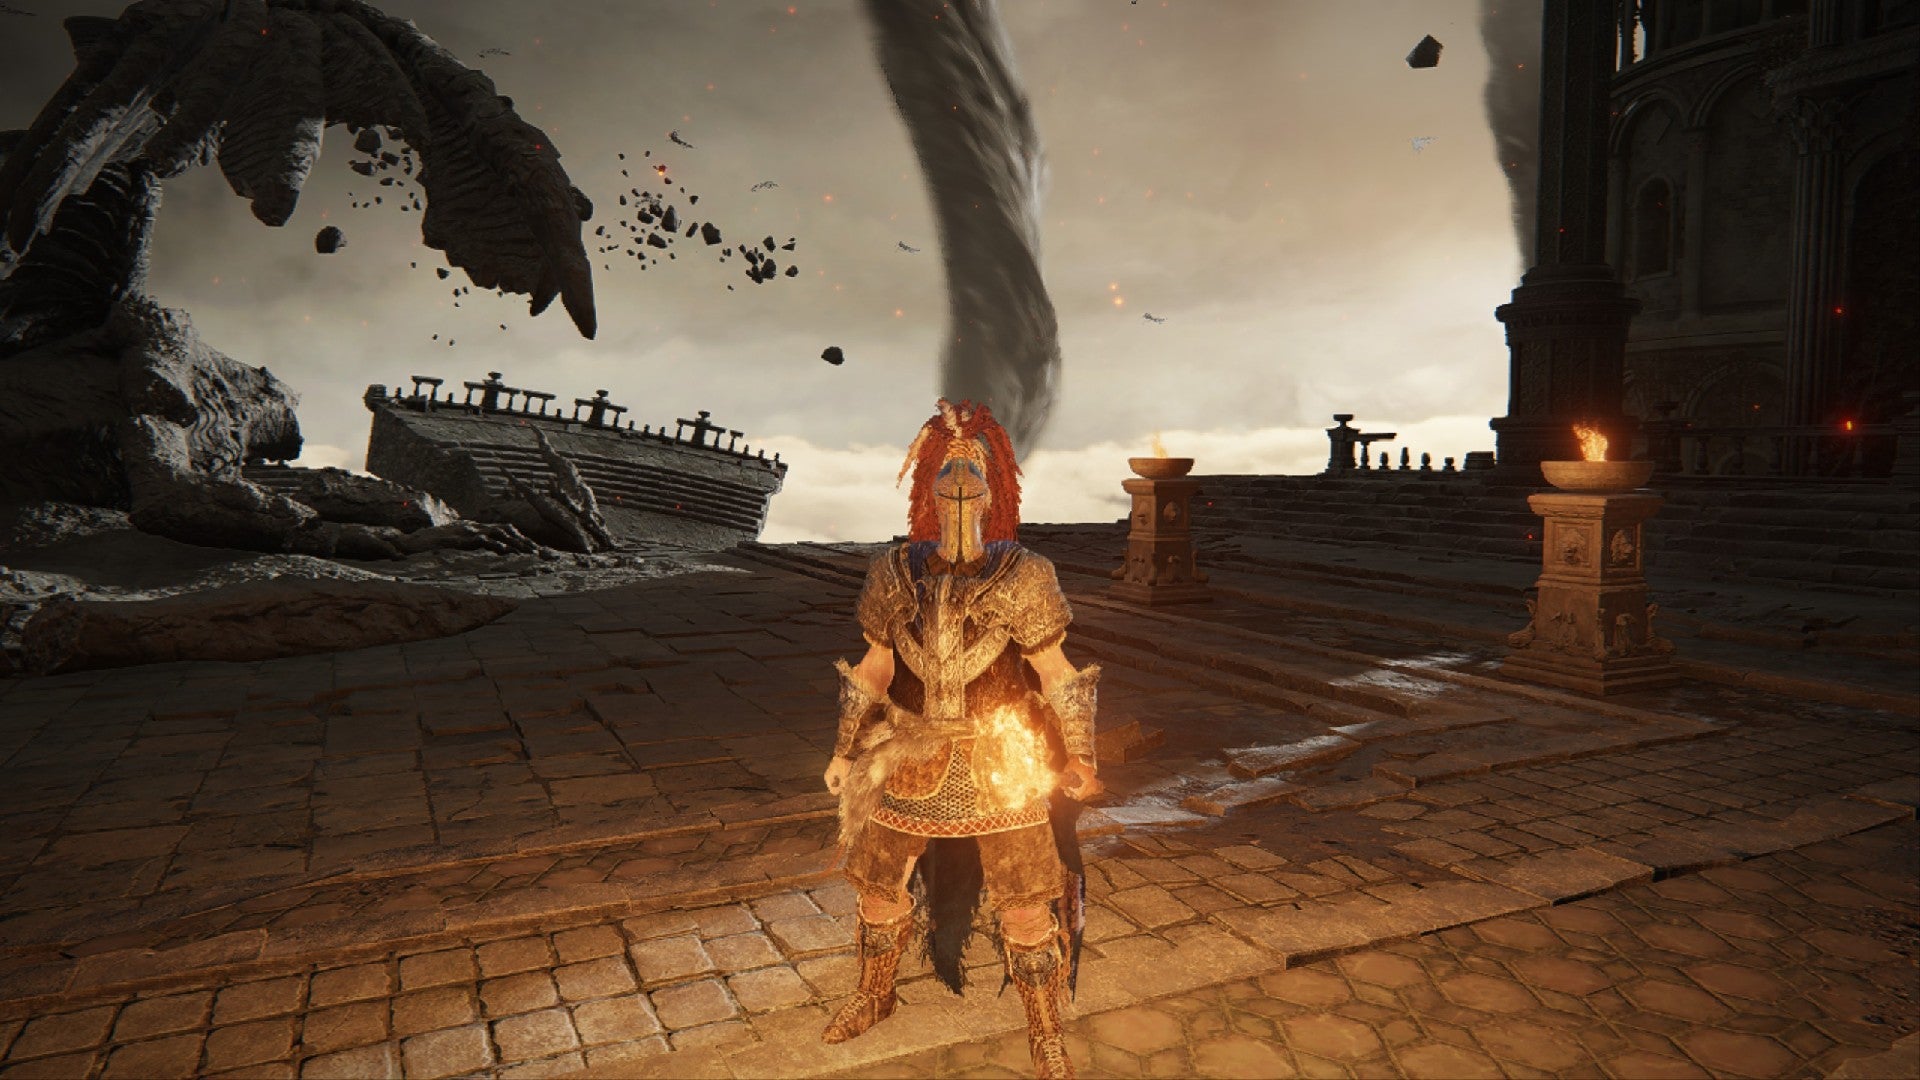 Elden Ring player stands by a stone dragon while a tornado rages in the background.